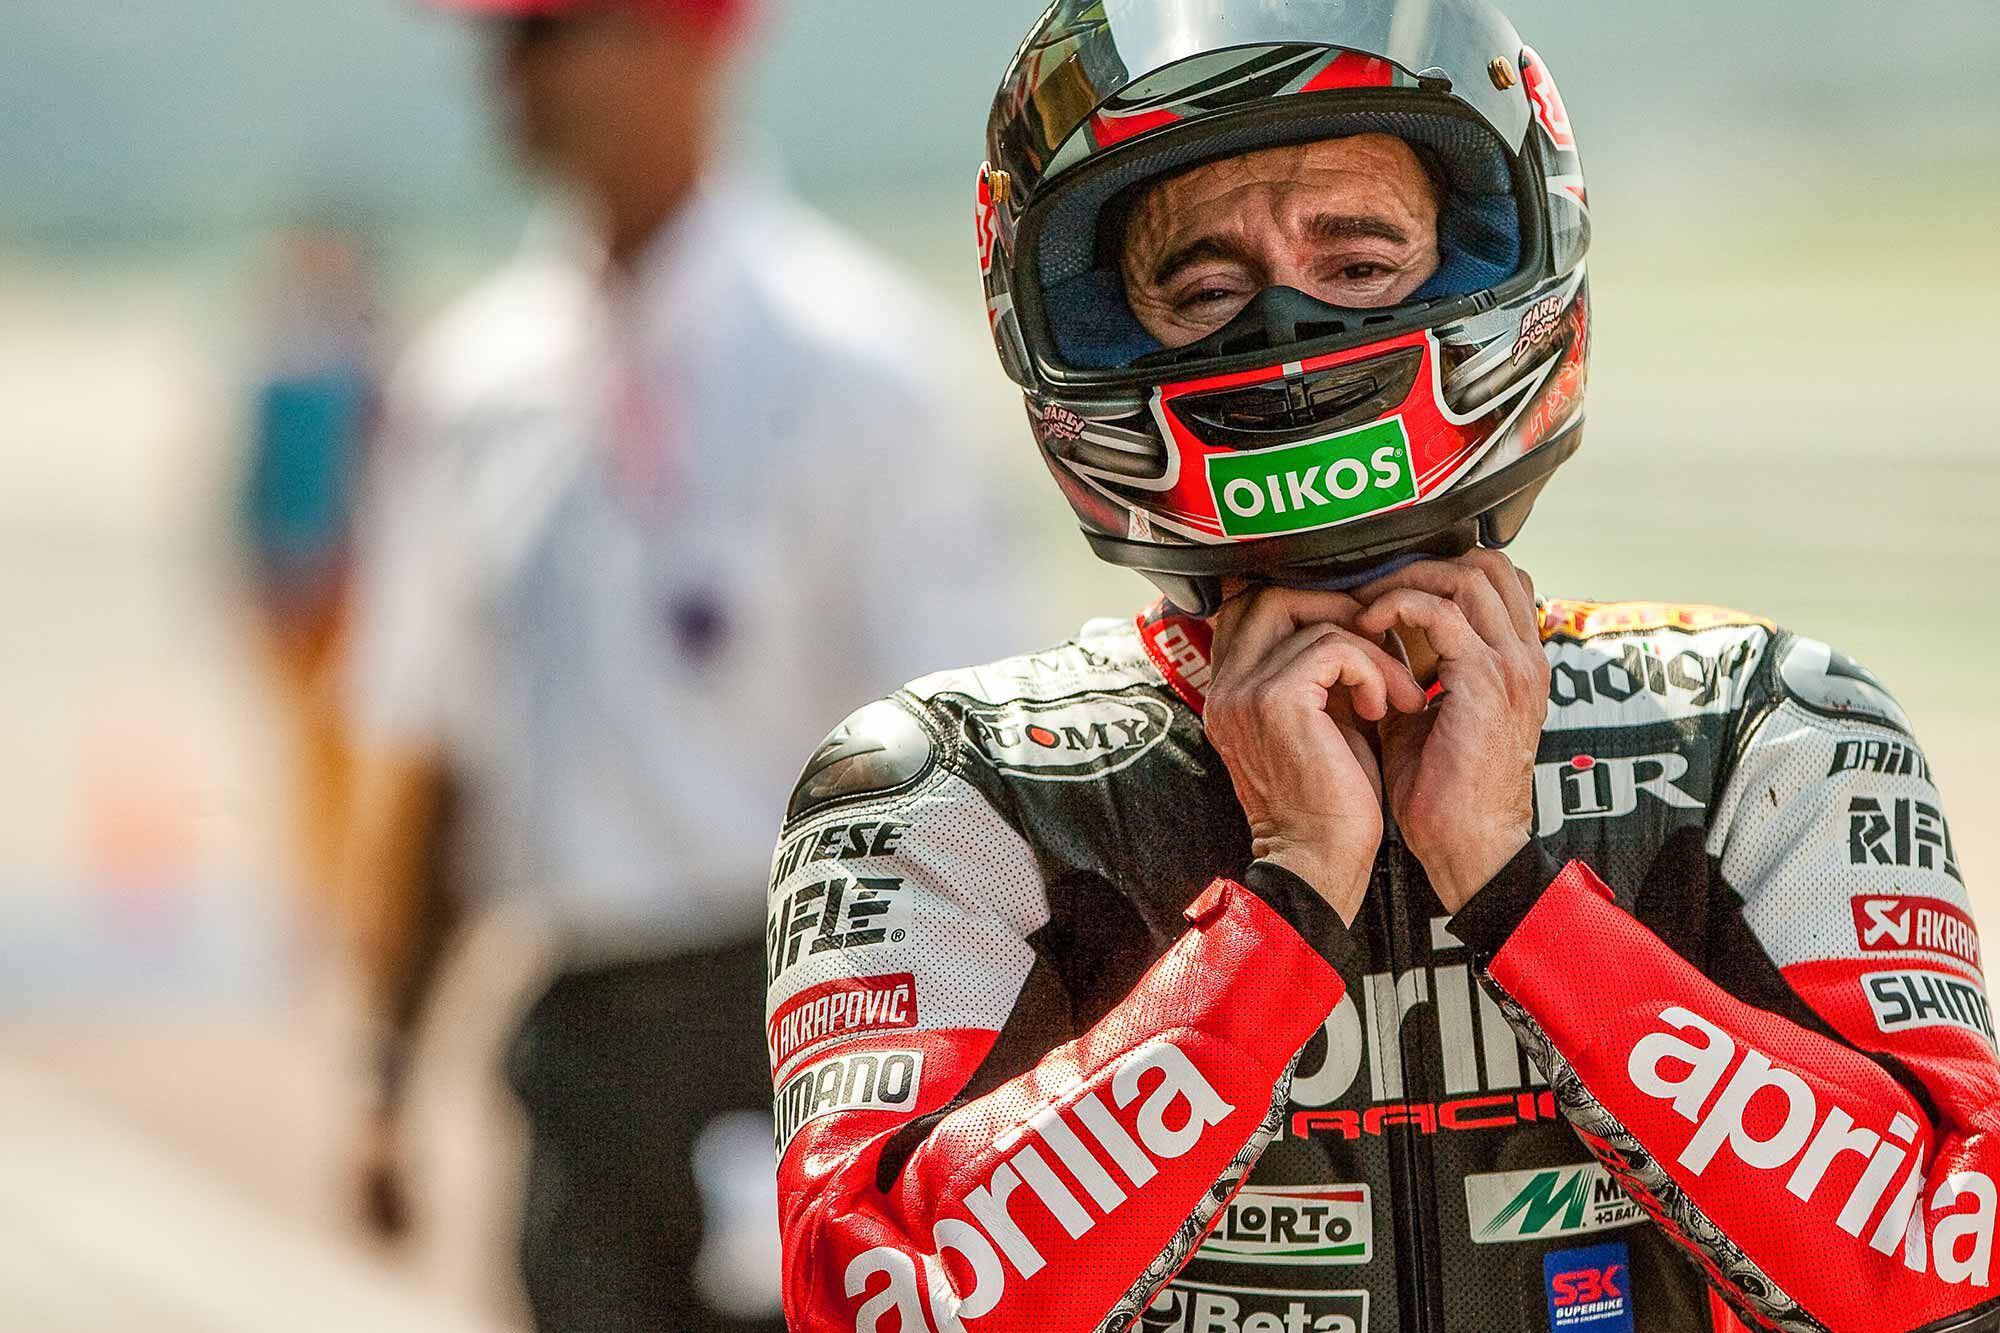 Max Biaggi talks to <i>Cycle World</i> about his racing career and rivalry with Valentino Rossi.